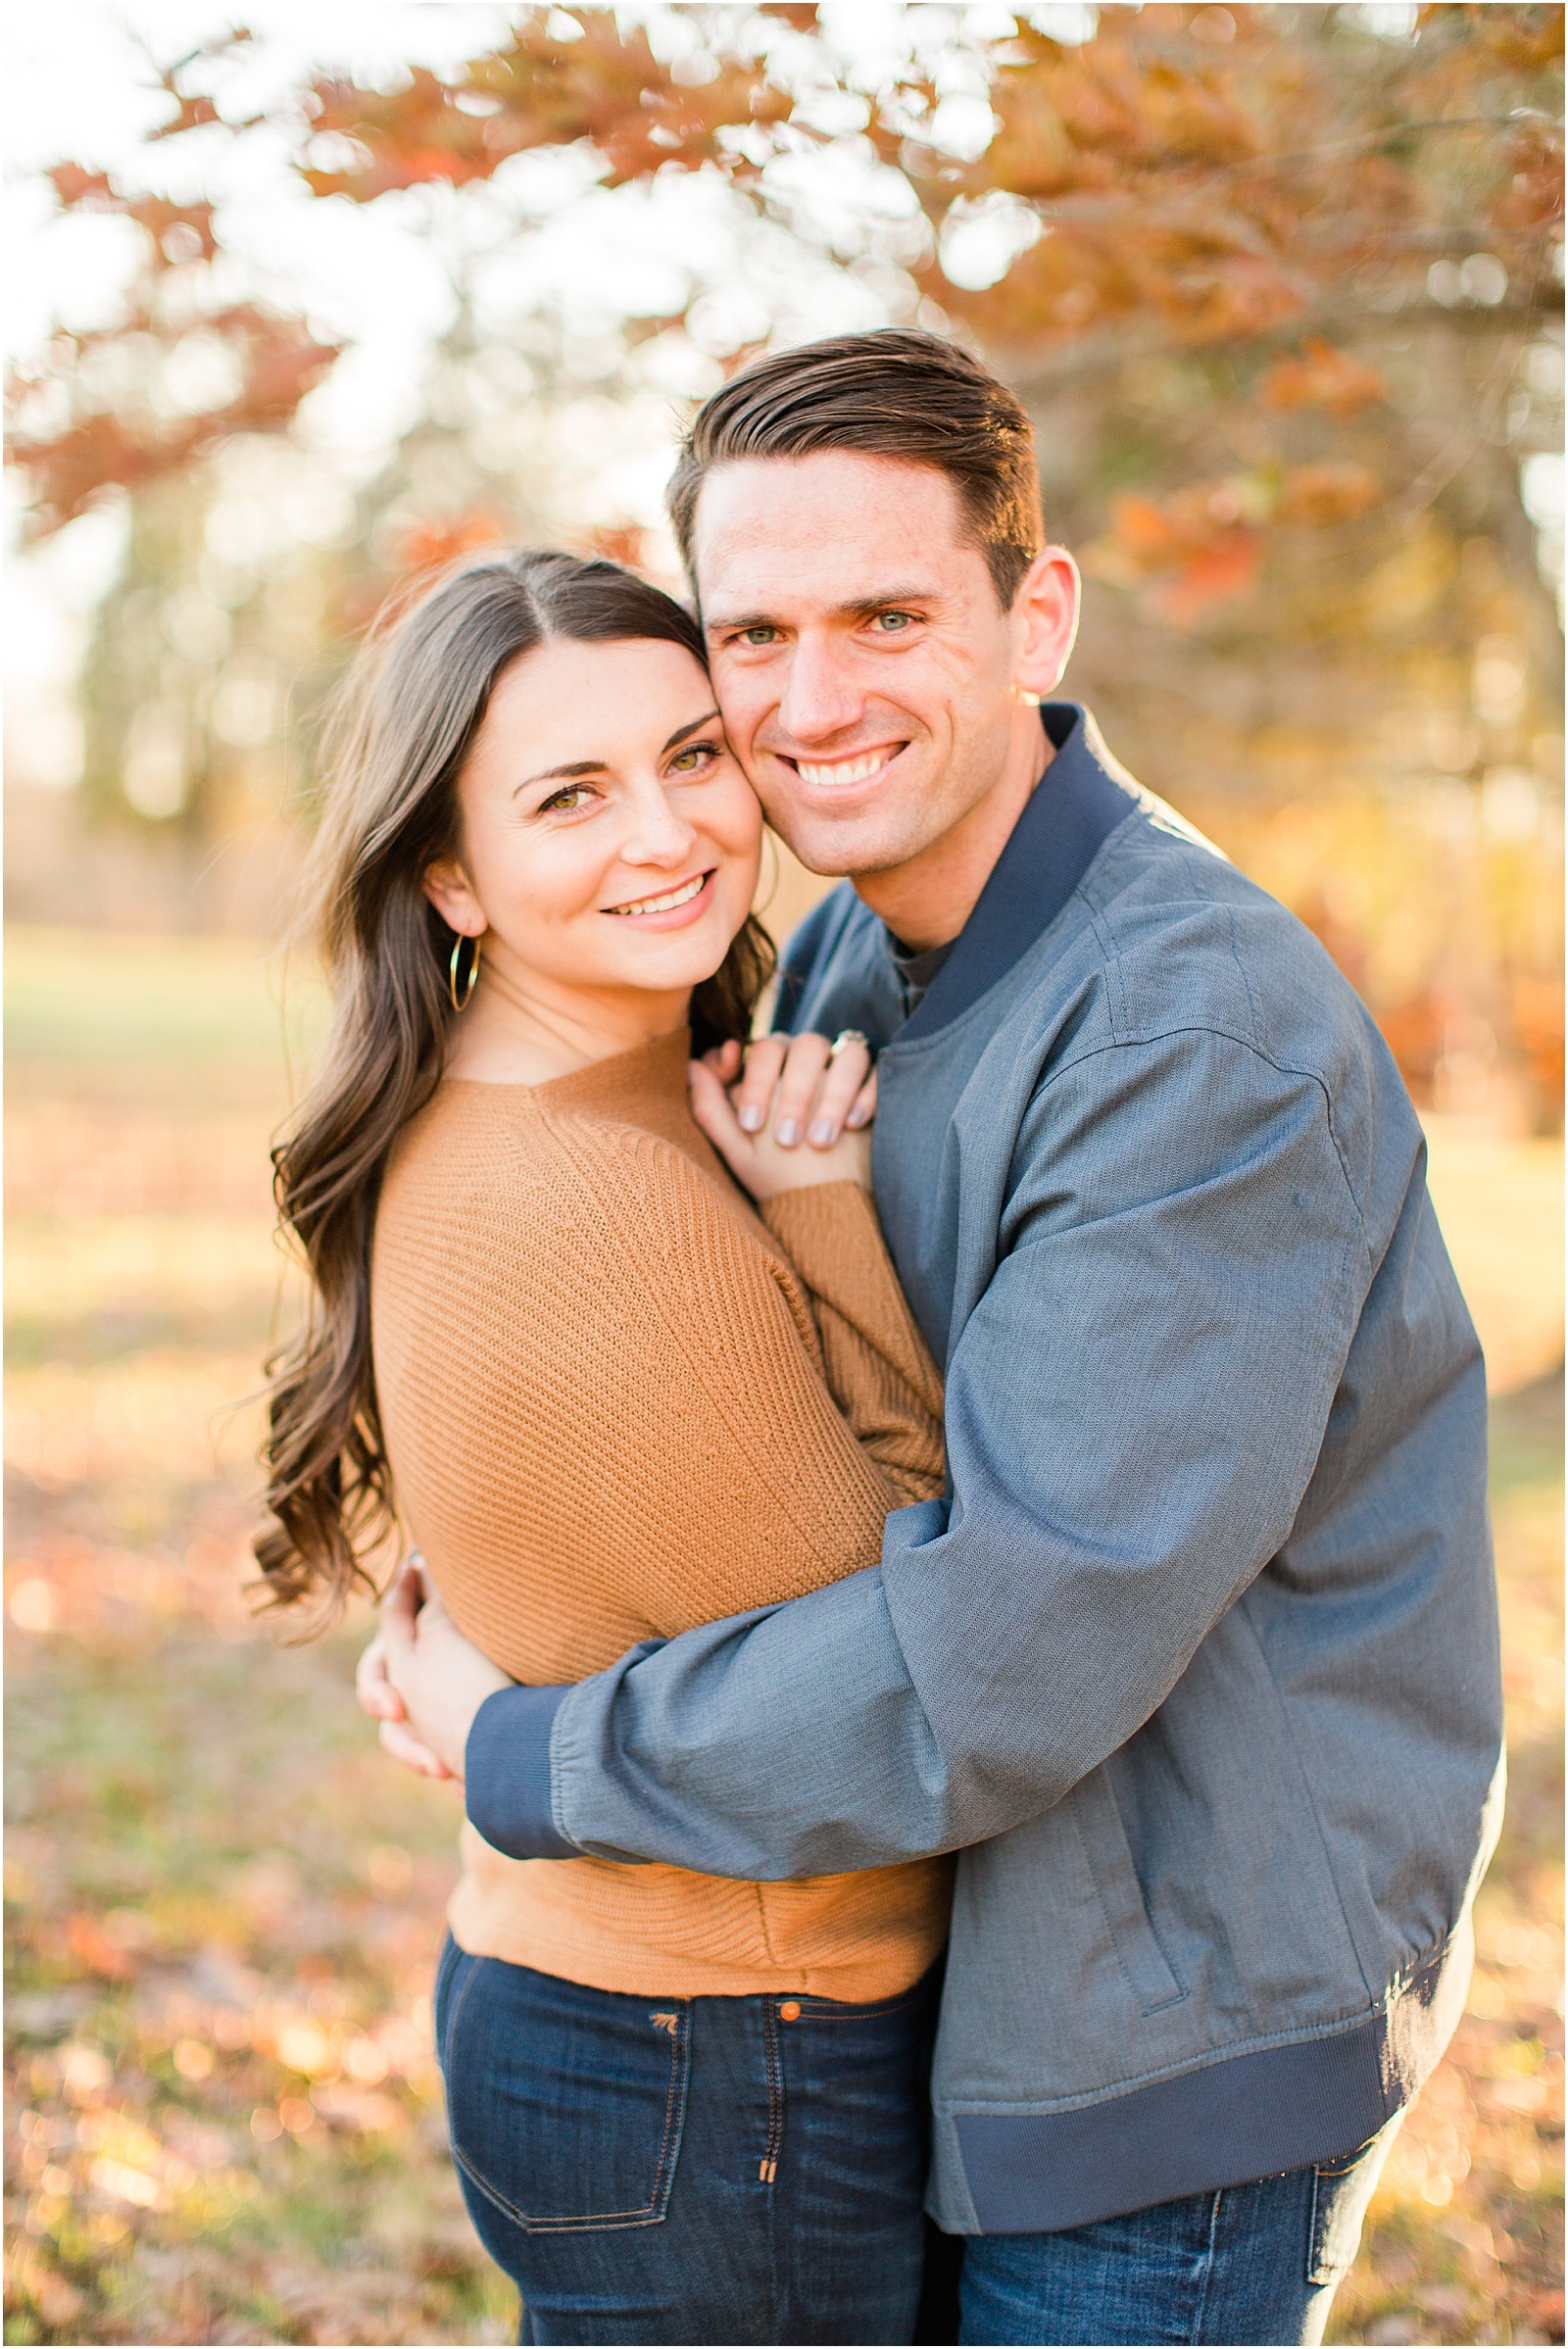 Kaley and Devon's fall Evansville Indiana engagement session. | #fallengagementsession #evansvilleindiana #evansvilleindianawedding | 0028.jpg